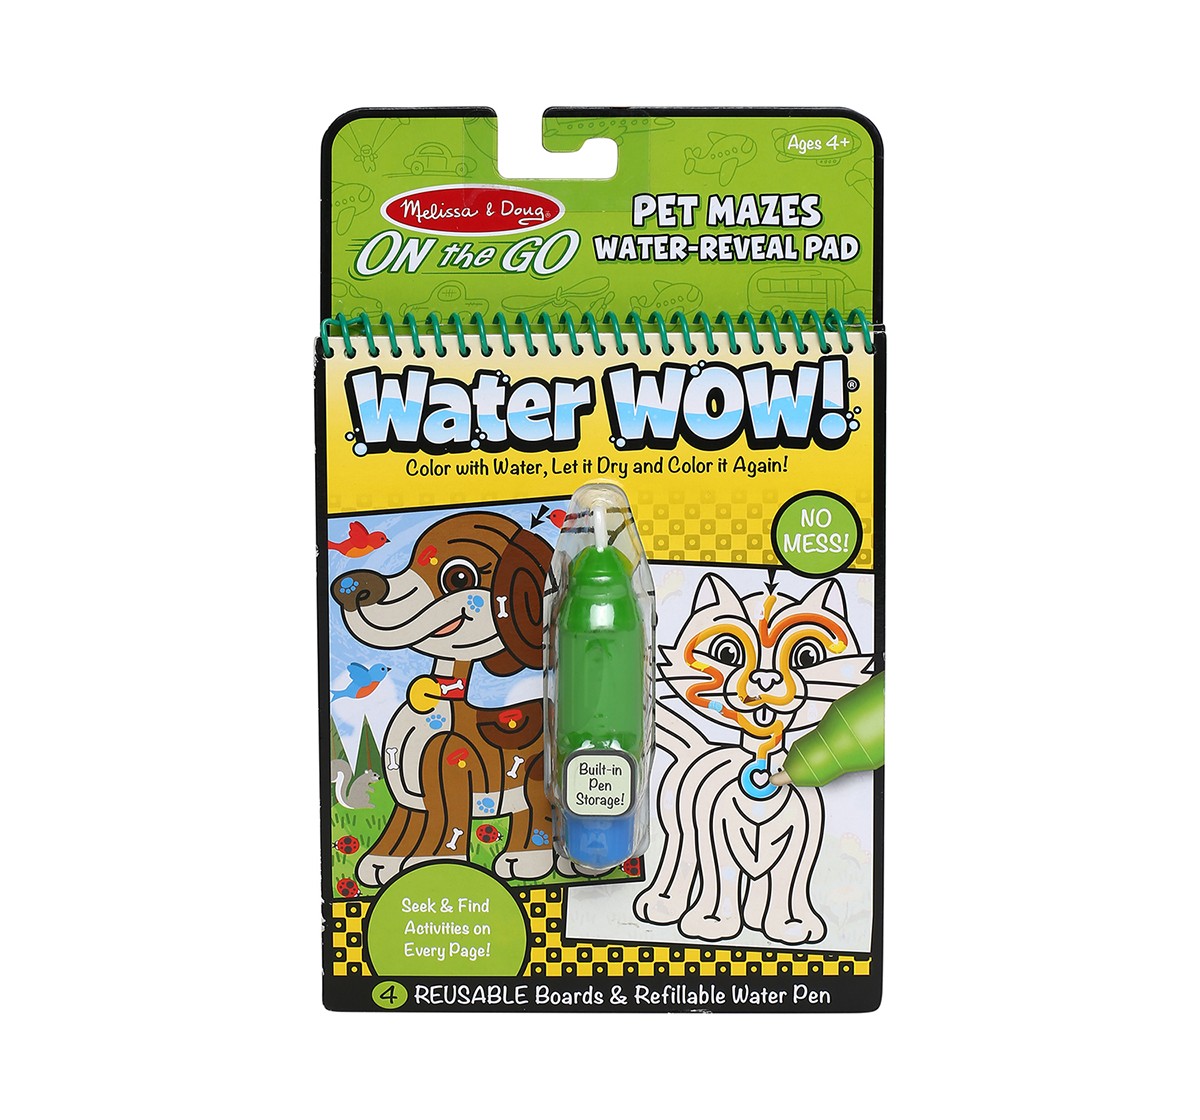 Melissa & Doug on The Go Water Wow! Pet Mazes Activity Pad (Reusable Reveal Coloring Book, Refillable Pen) School Stationery for Kids age 4Y+ 